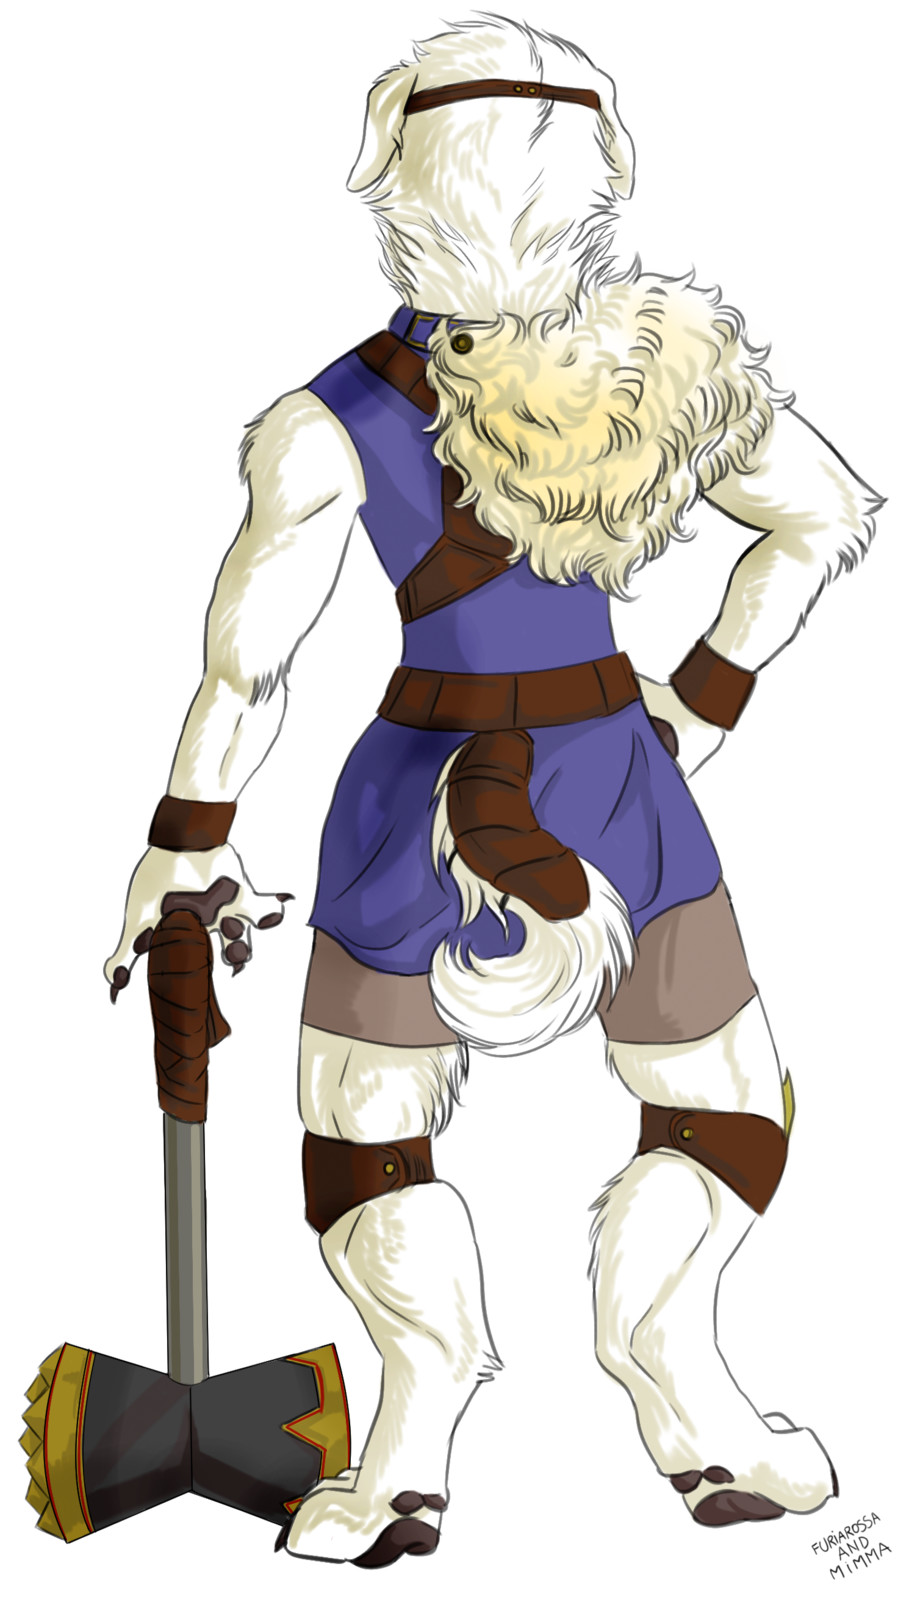 Back view of the character (colored)